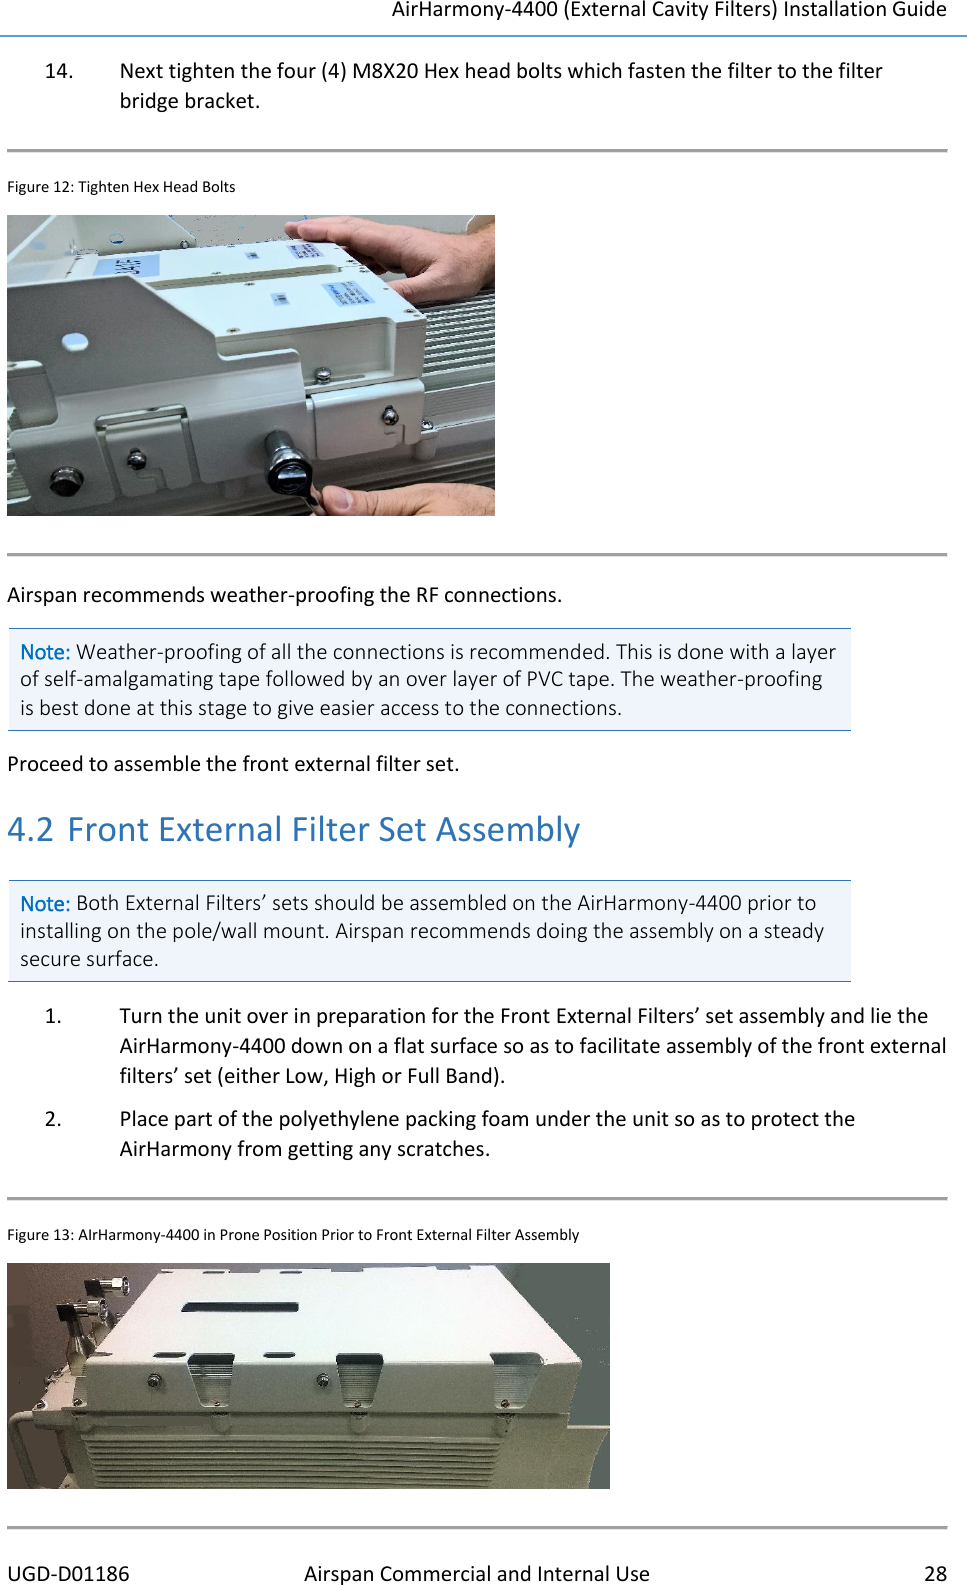 AirHarmony-4400 (External Cavity Filters) Installation Guide UGD-D01186 Airspan Commercial and Internal Use  28  14. Next tighten the four (4) M8X20 Hex head bolts which fasten the filter to the filter bridge bracket.  Figure 12: Tighten Hex Head Bolts   Airspan recommends weather-proofing the RF connections. Note: Weather-proofing of all the connections is recommended. This is done with a layer of self-amalgamating tape followed by an over layer of PVC tape. The weather-proofing is best done at this stage to give easier access to the connections.   Proceed to assemble the front external filter set.  4.2 Front External Filter Set Assembly Note: Both External Filters’ sets should be assembled on the AirHarmony-4400 prior to installing on the pole/wall mount. Airspan recommends doing the assembly on a steady secure surface.   1. Turn the unit over in preparation for the Front External Filters’ set assembly and lie the AirHarmony-4400 down on a flat surface so as to facilitate assembly of the front external filters’ set (either Low, High or Full Band). 2. Place part of the polyethylene packing foam under the unit so as to protect the AirHarmony from getting any scratches.   Figure 13: AIrHarmony-4400 in Prone Position Prior to Front External Filter Assembly   